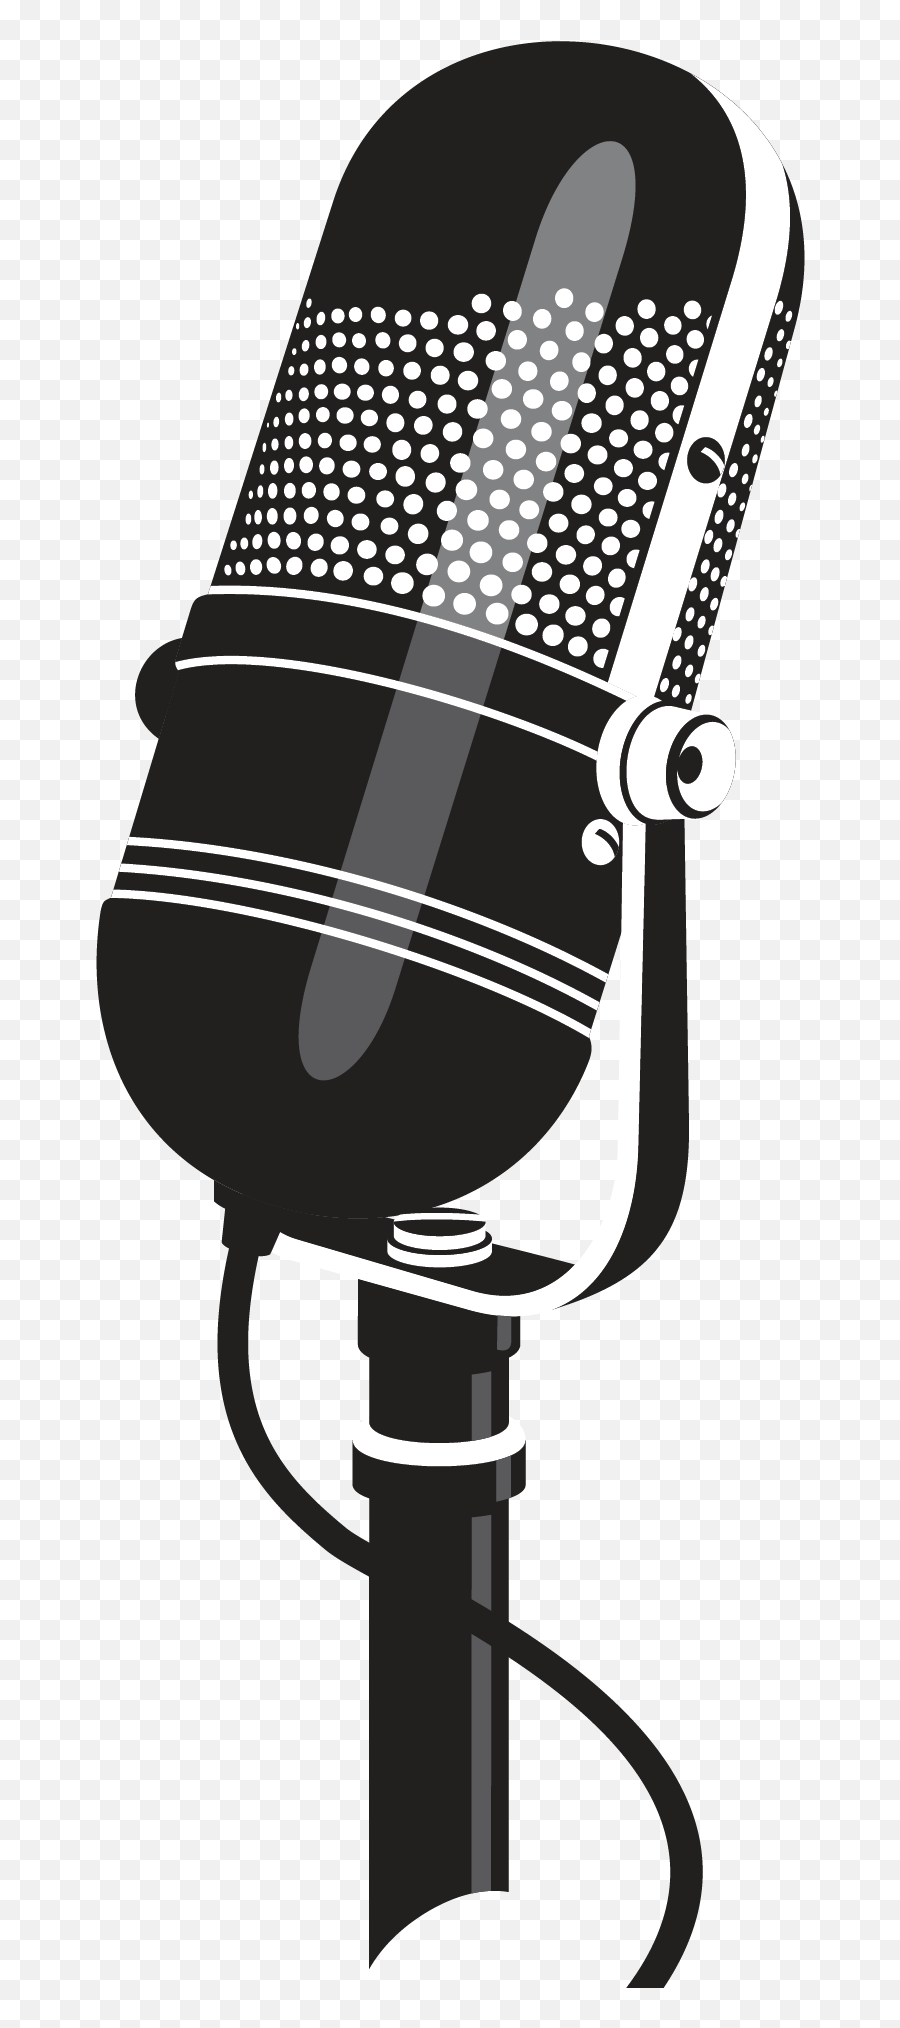 Masoom Maut Part - 4 Audiowallah Podcasts By Ideabrew Emoji,Vintage Microphone Clipart